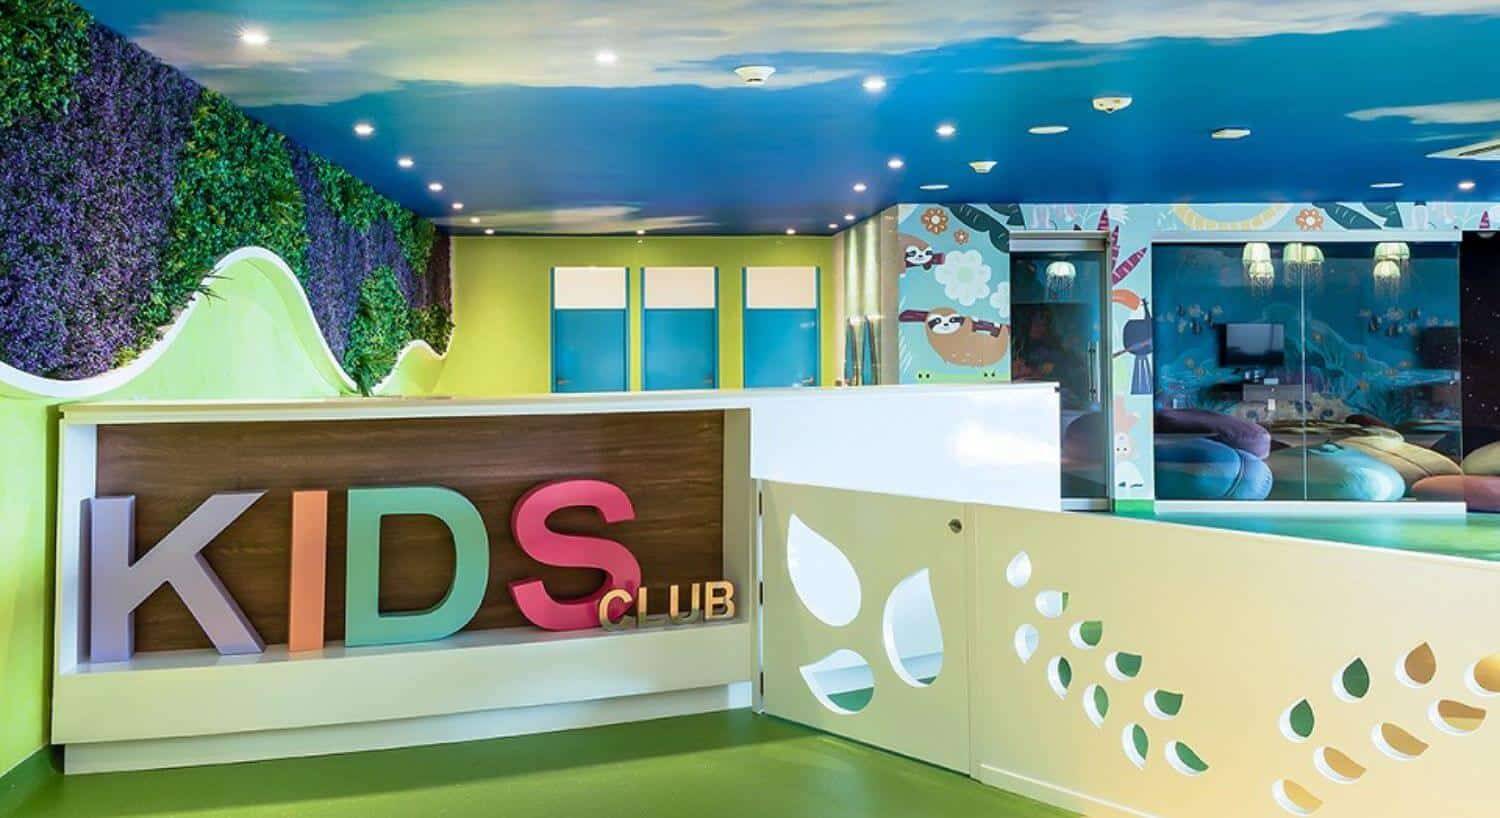 A colorful sign that says Kids Club in a room with painted walls and ceiling, and colorful activities for kids to do.